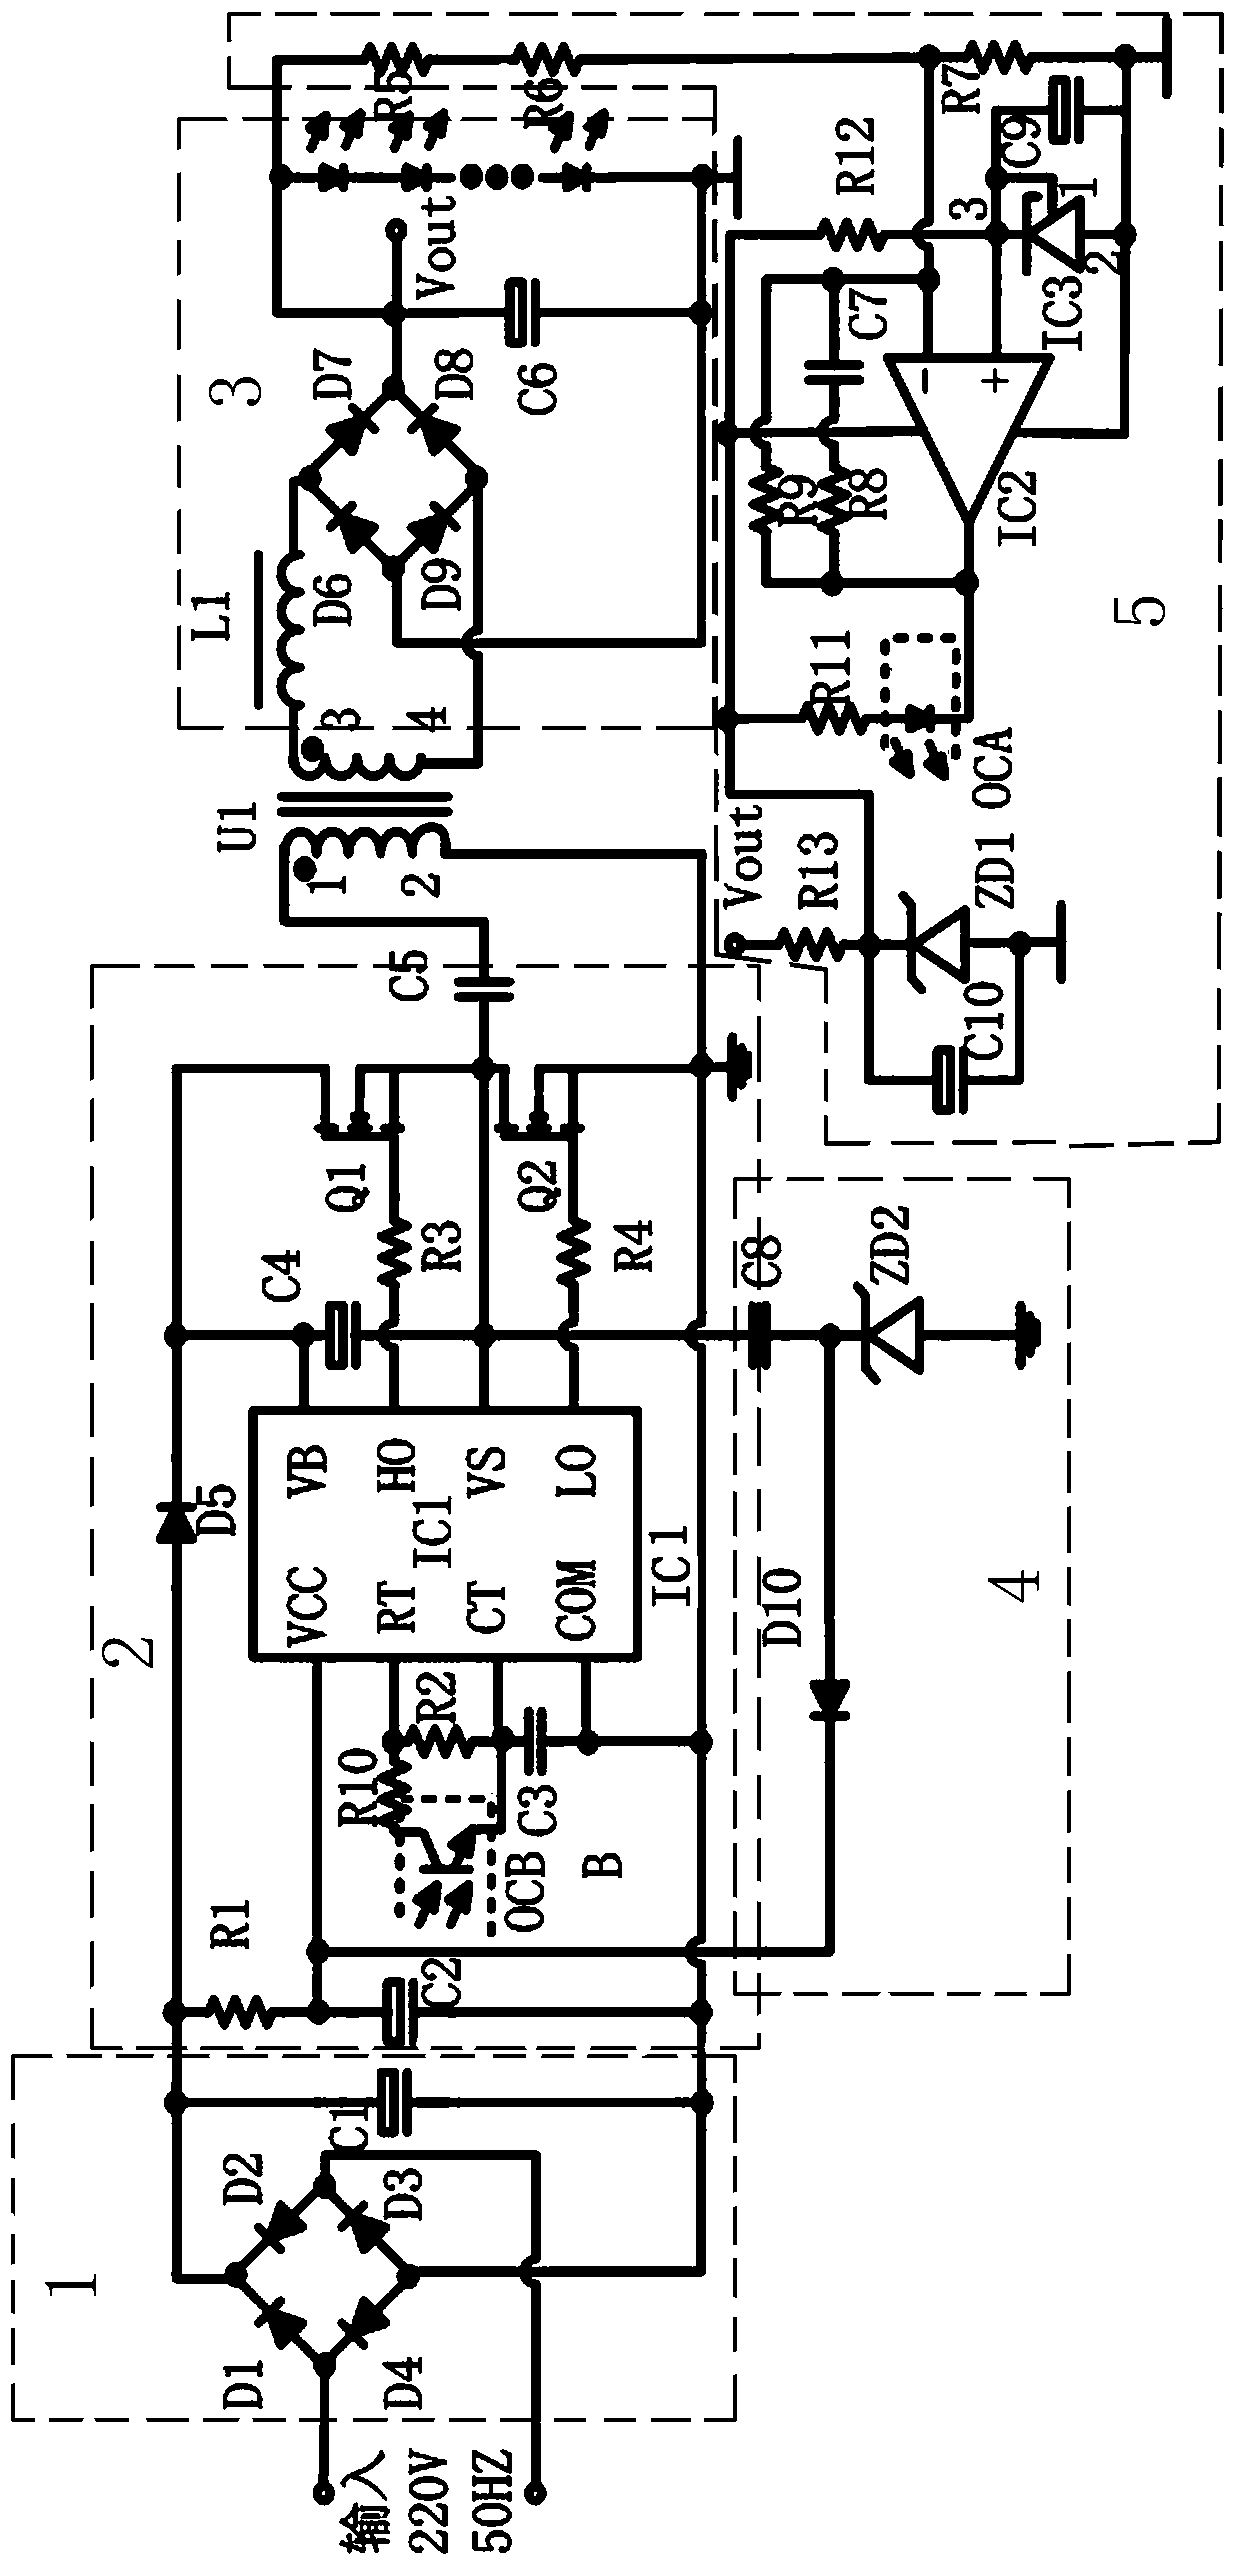 LED half-bridge circuit with feedback variable-frequency constant-current driving